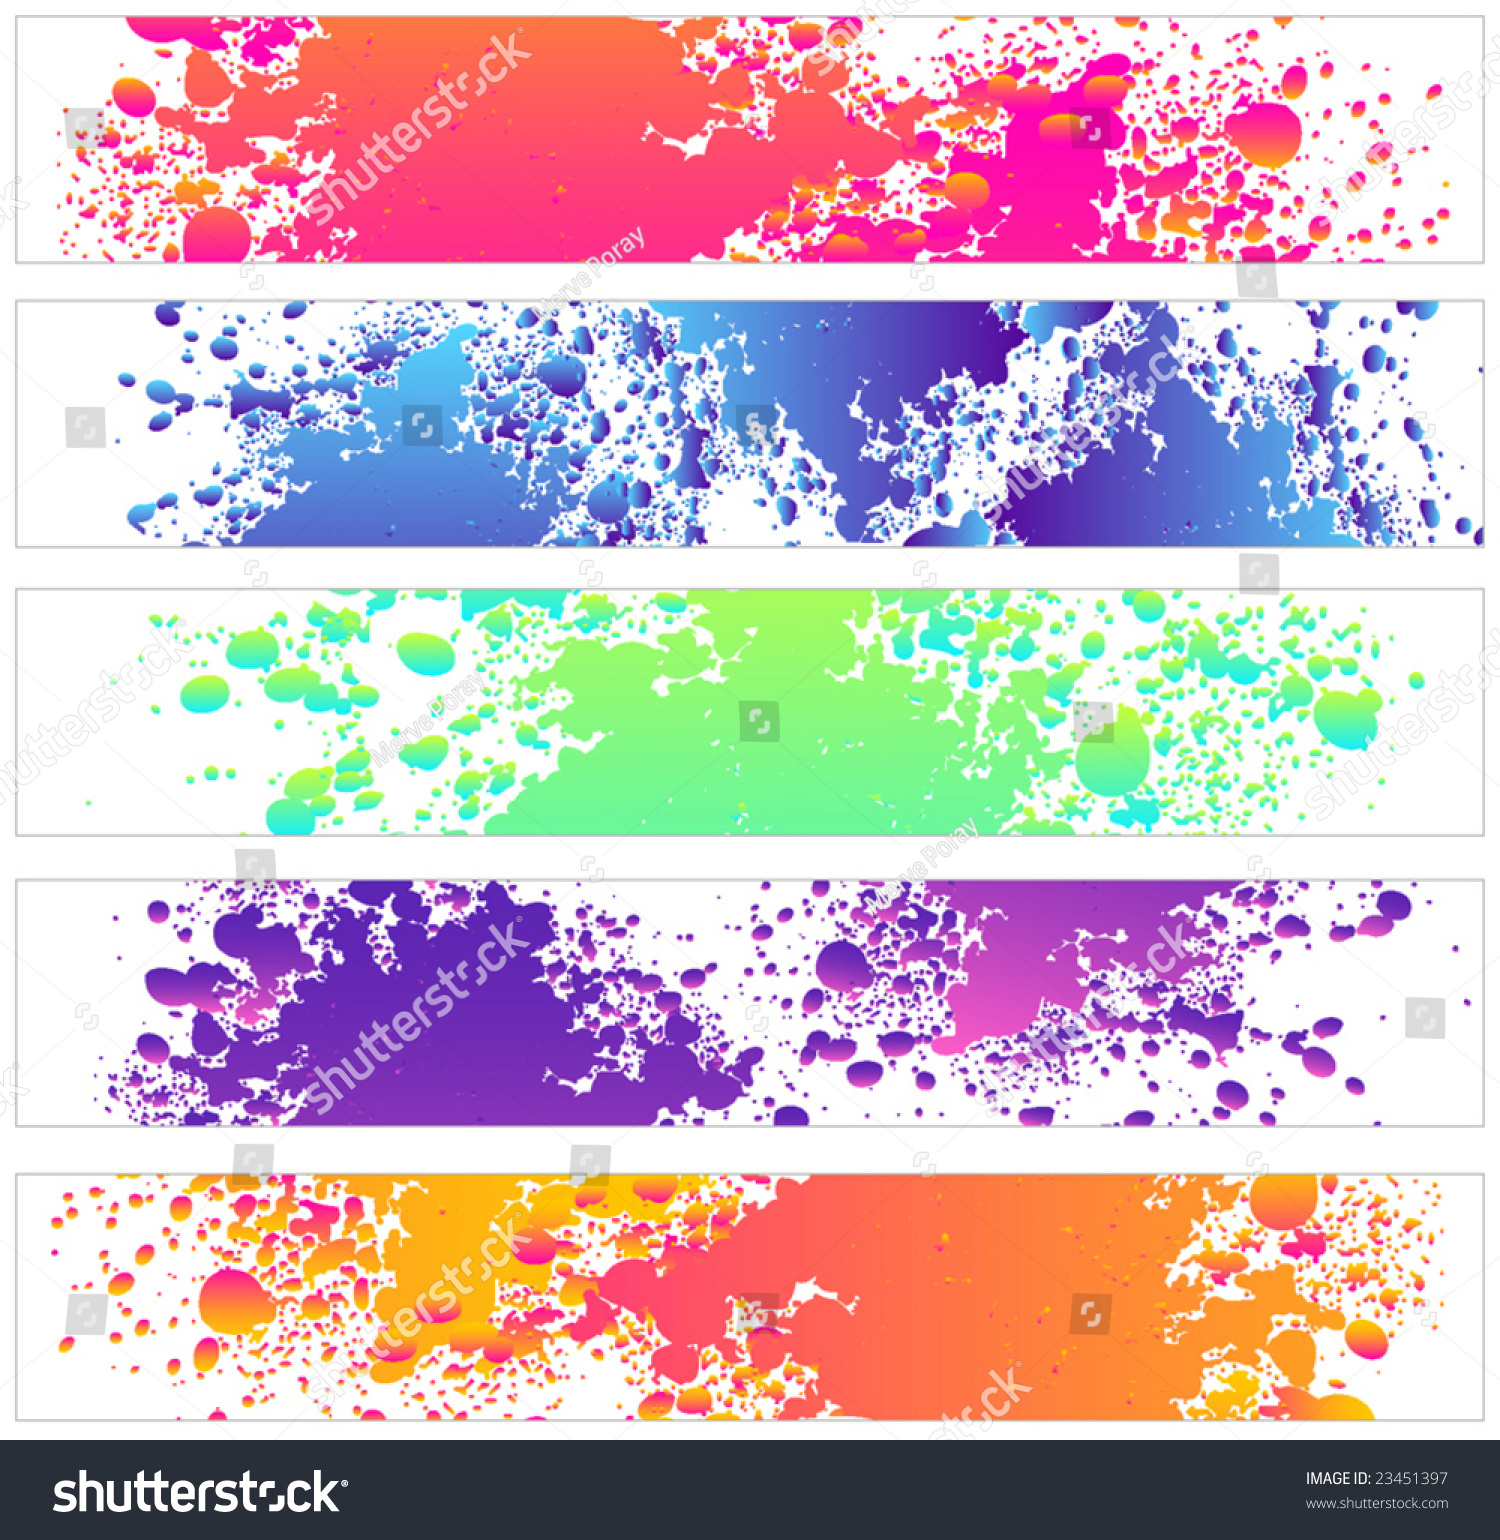 Vector Retro Colorful Banners - 23451397 : Shutterstock